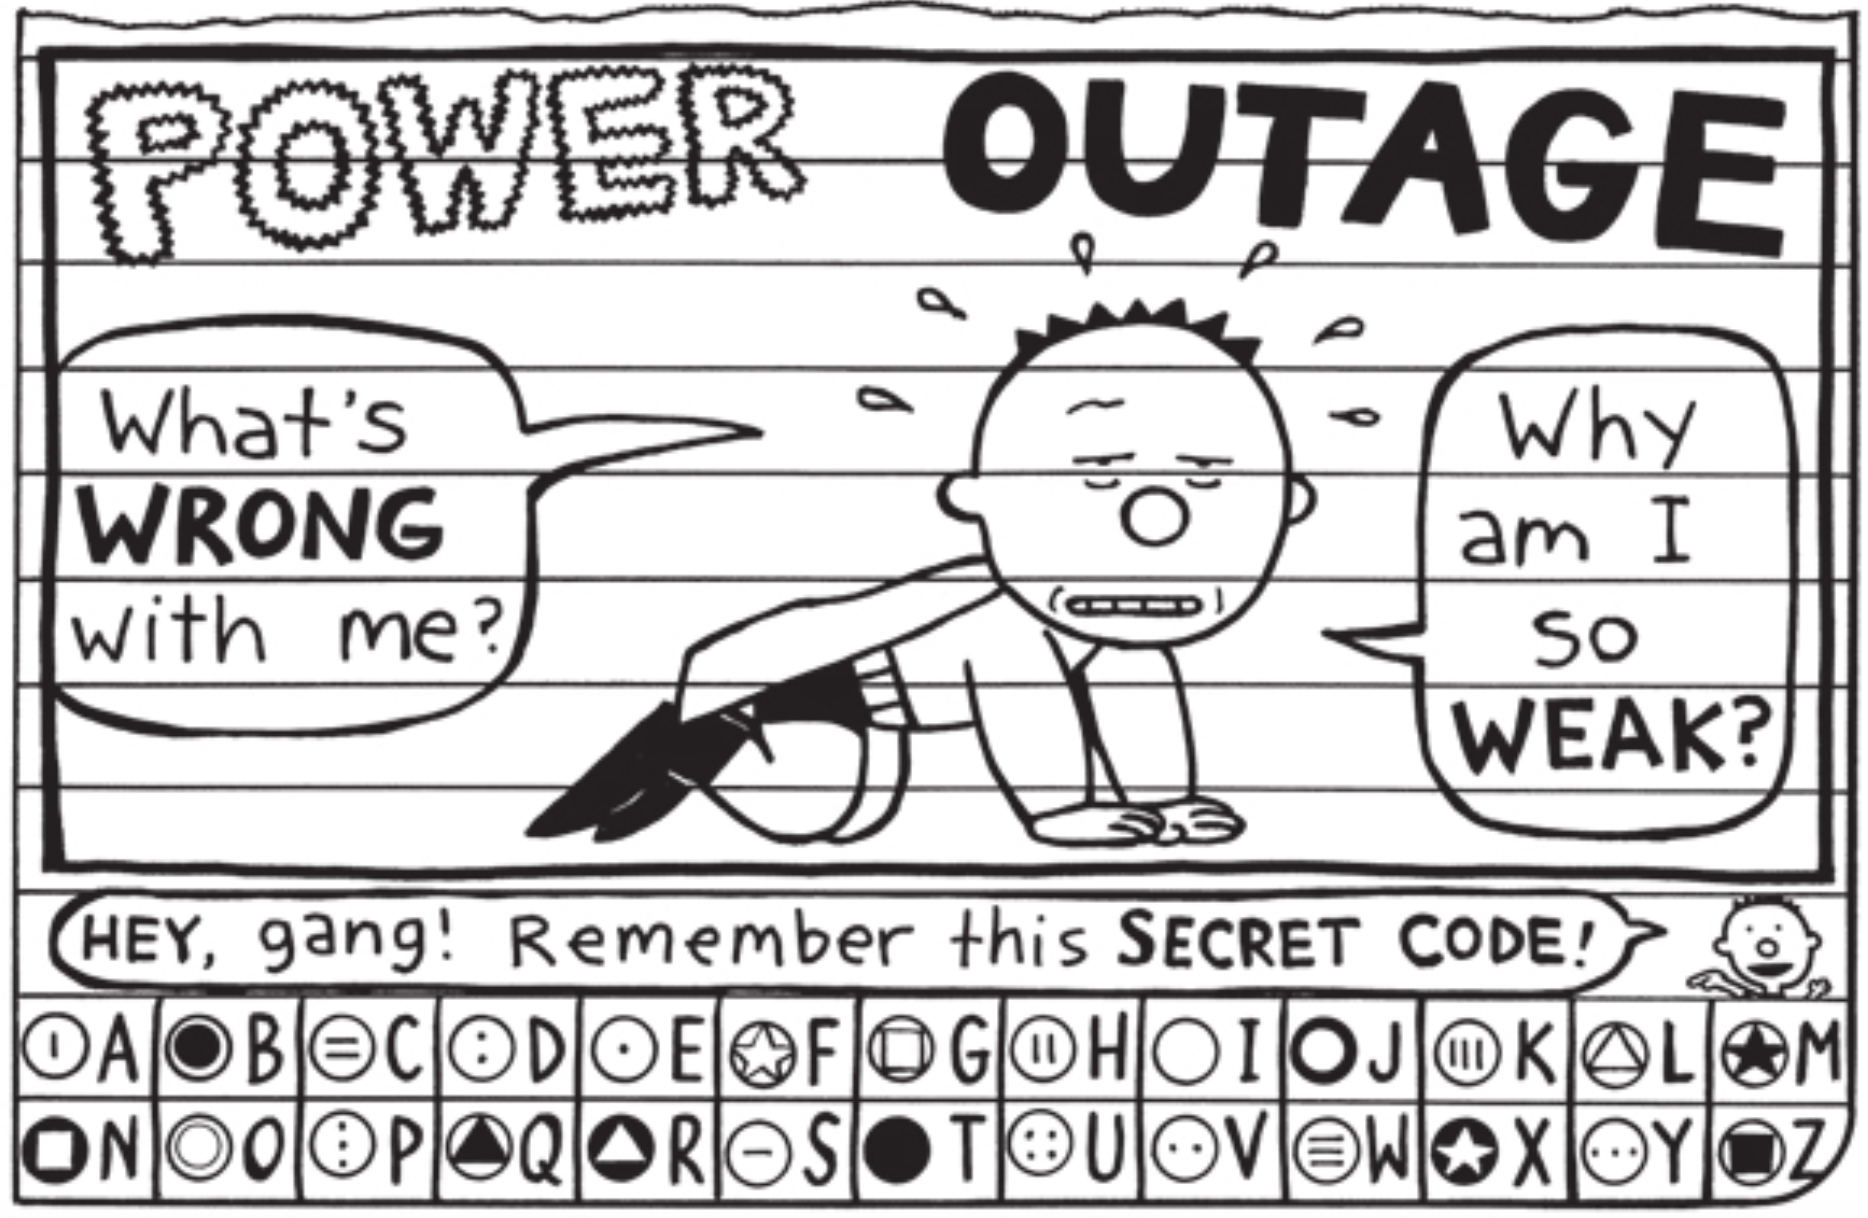 power outage comic